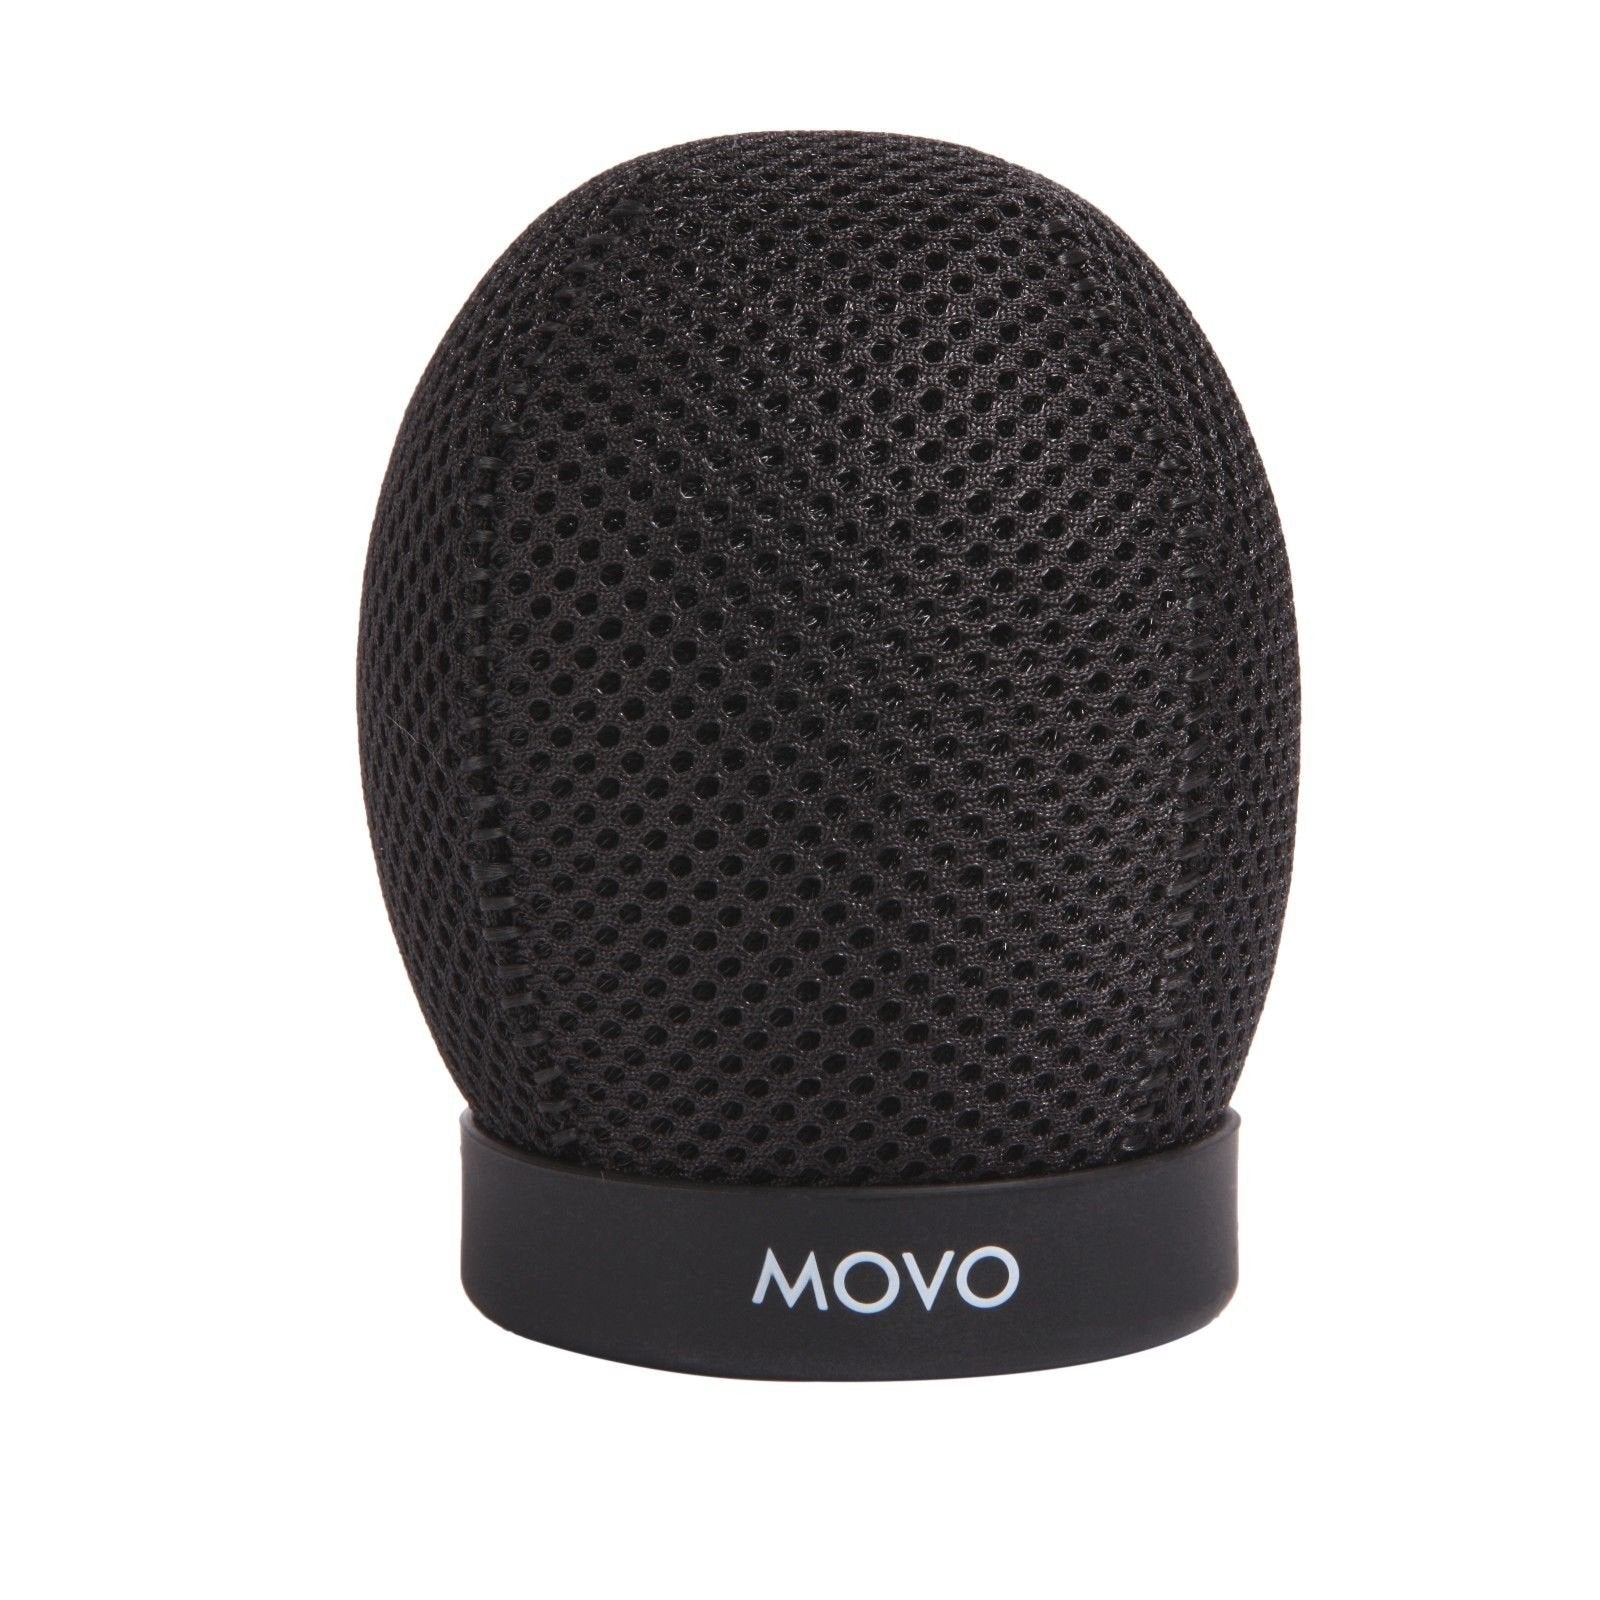 Movo WST120 Professional Premium Quality Ballistic Nylon Windscreen with Acoustic Foam Technology for Shotgun Microphones up to 10cm Long  - Like New